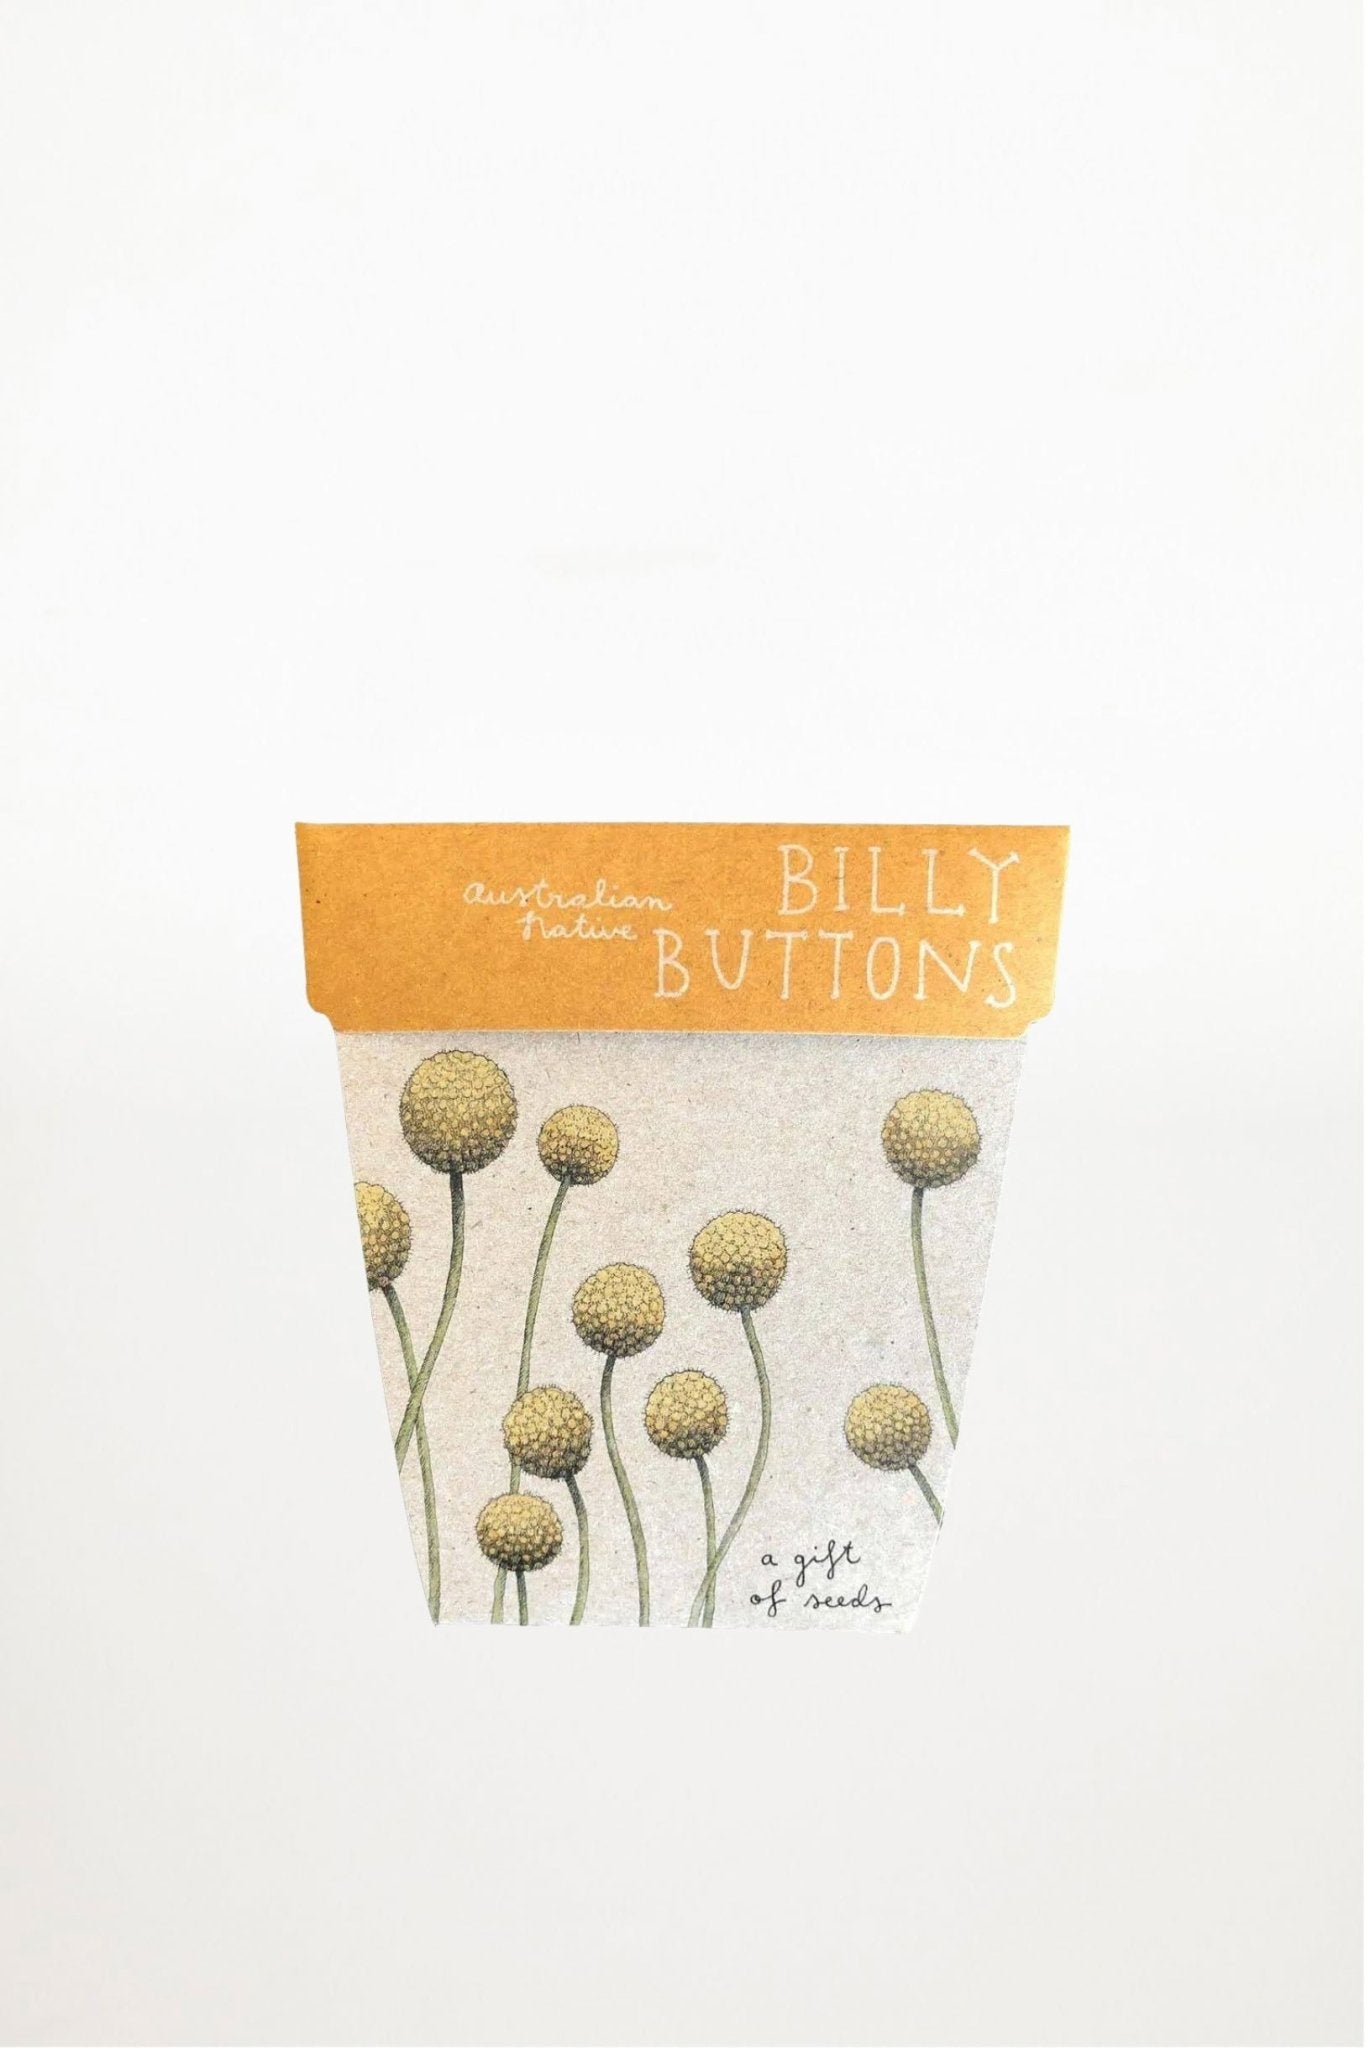 Sow 'n Sow - Billy Buttons Gift of Seeds (Australia Only) - Ensemble Studios